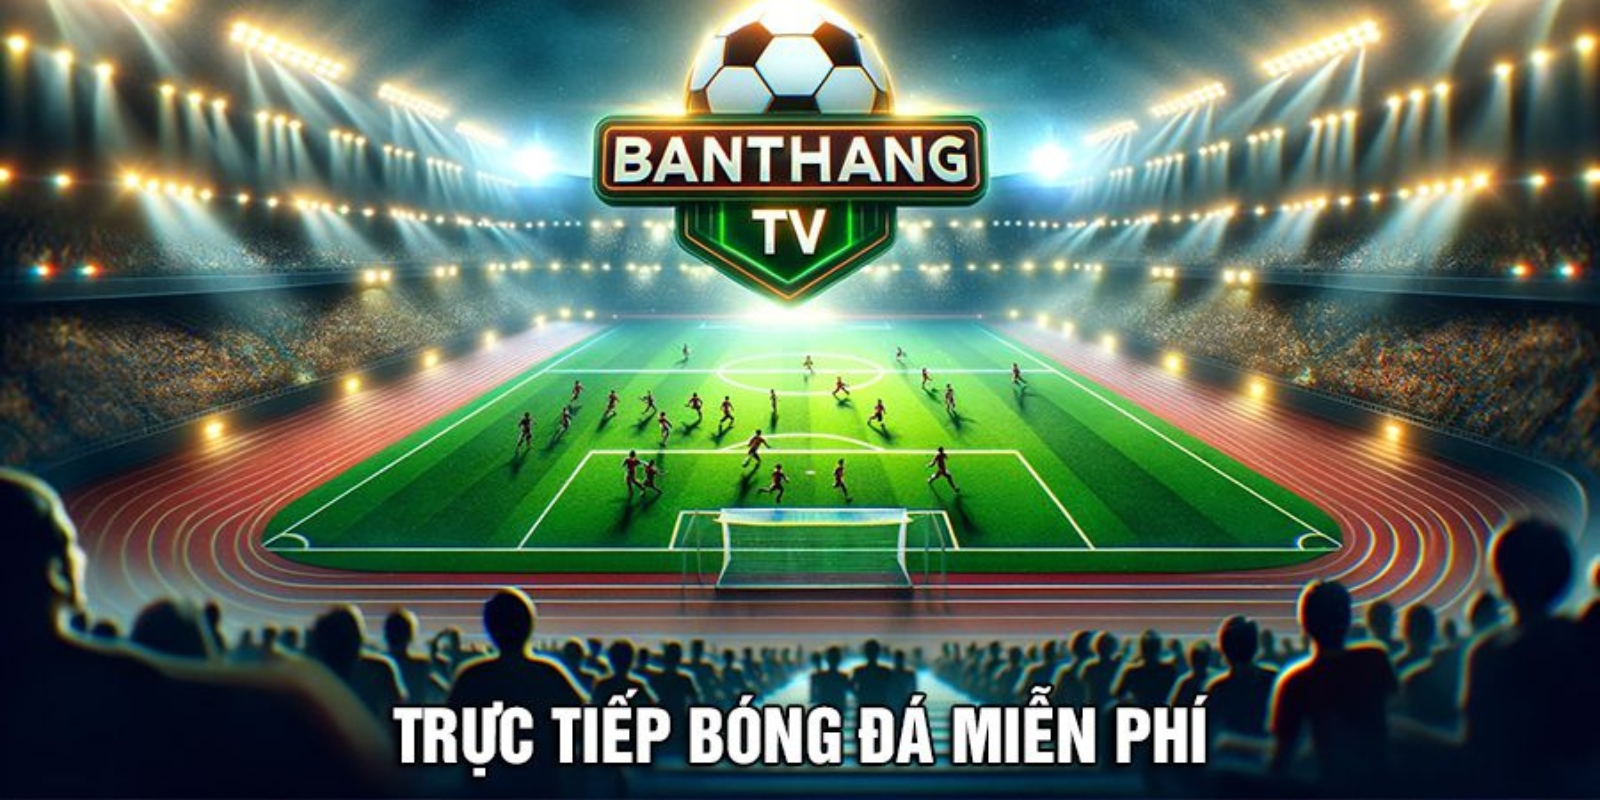 BANTHANG TV Cover Image